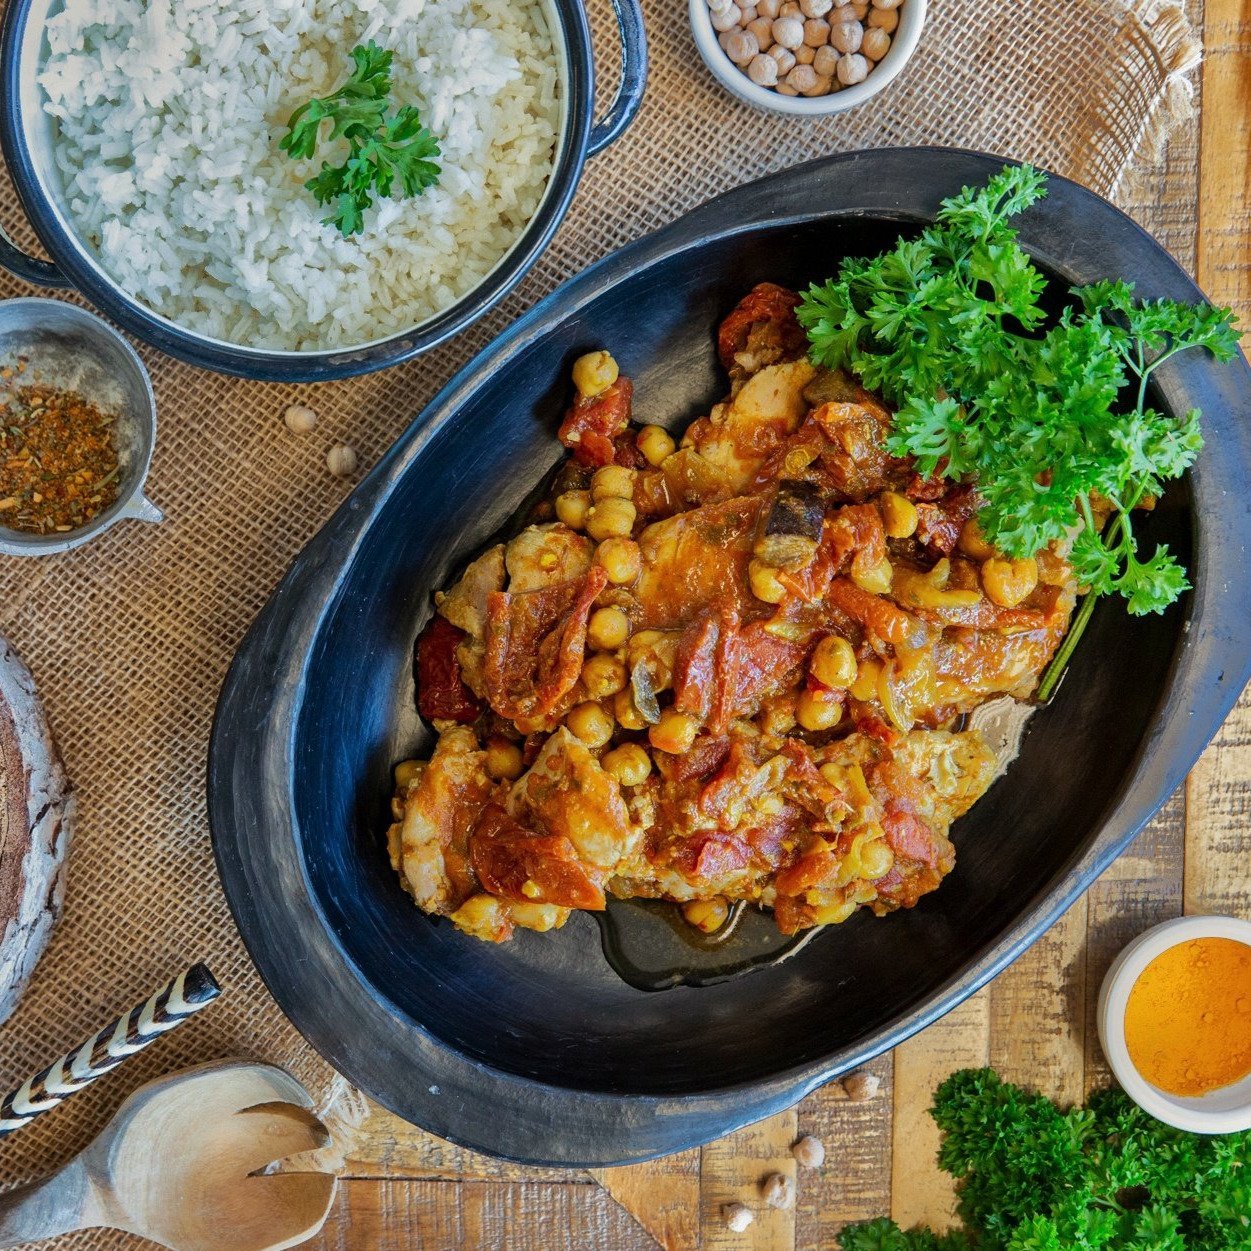 Moroccan Chicken (approx. 700g)